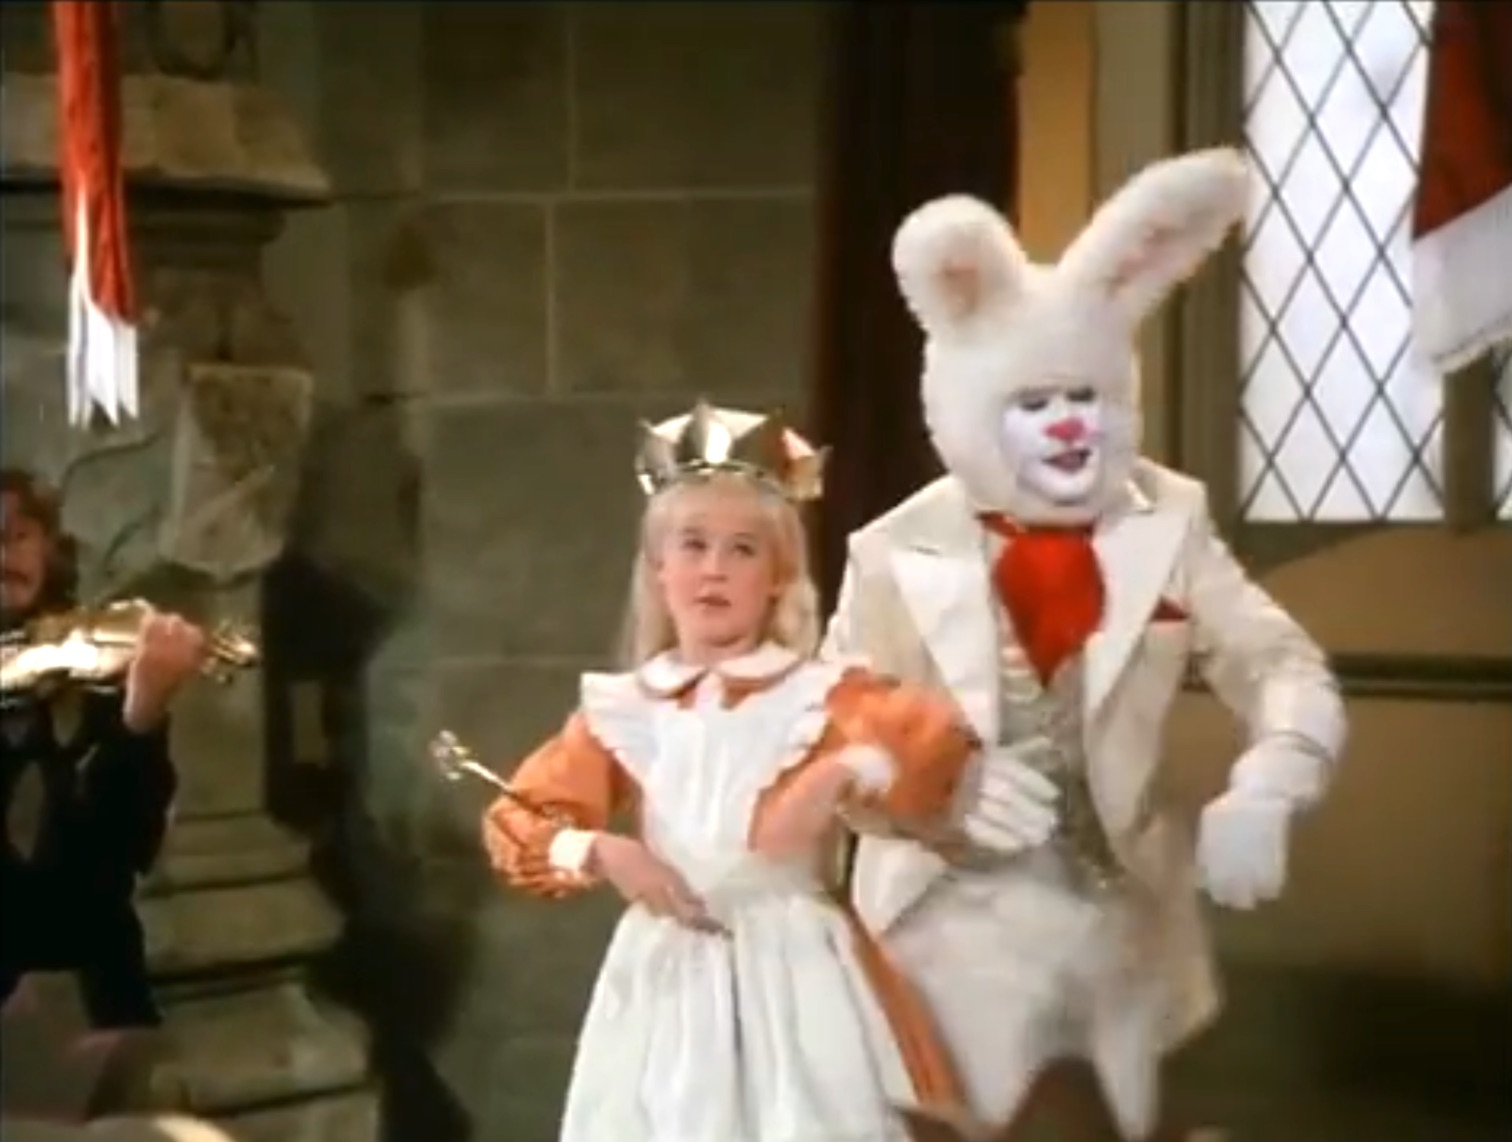 Song lyrics to Welcome Queen Alice, Music by Steve Allen, Lyrics by Lewis Carroll, Performed by Red Buttons and Natalie Gregory in Alice in Wonderful 1985